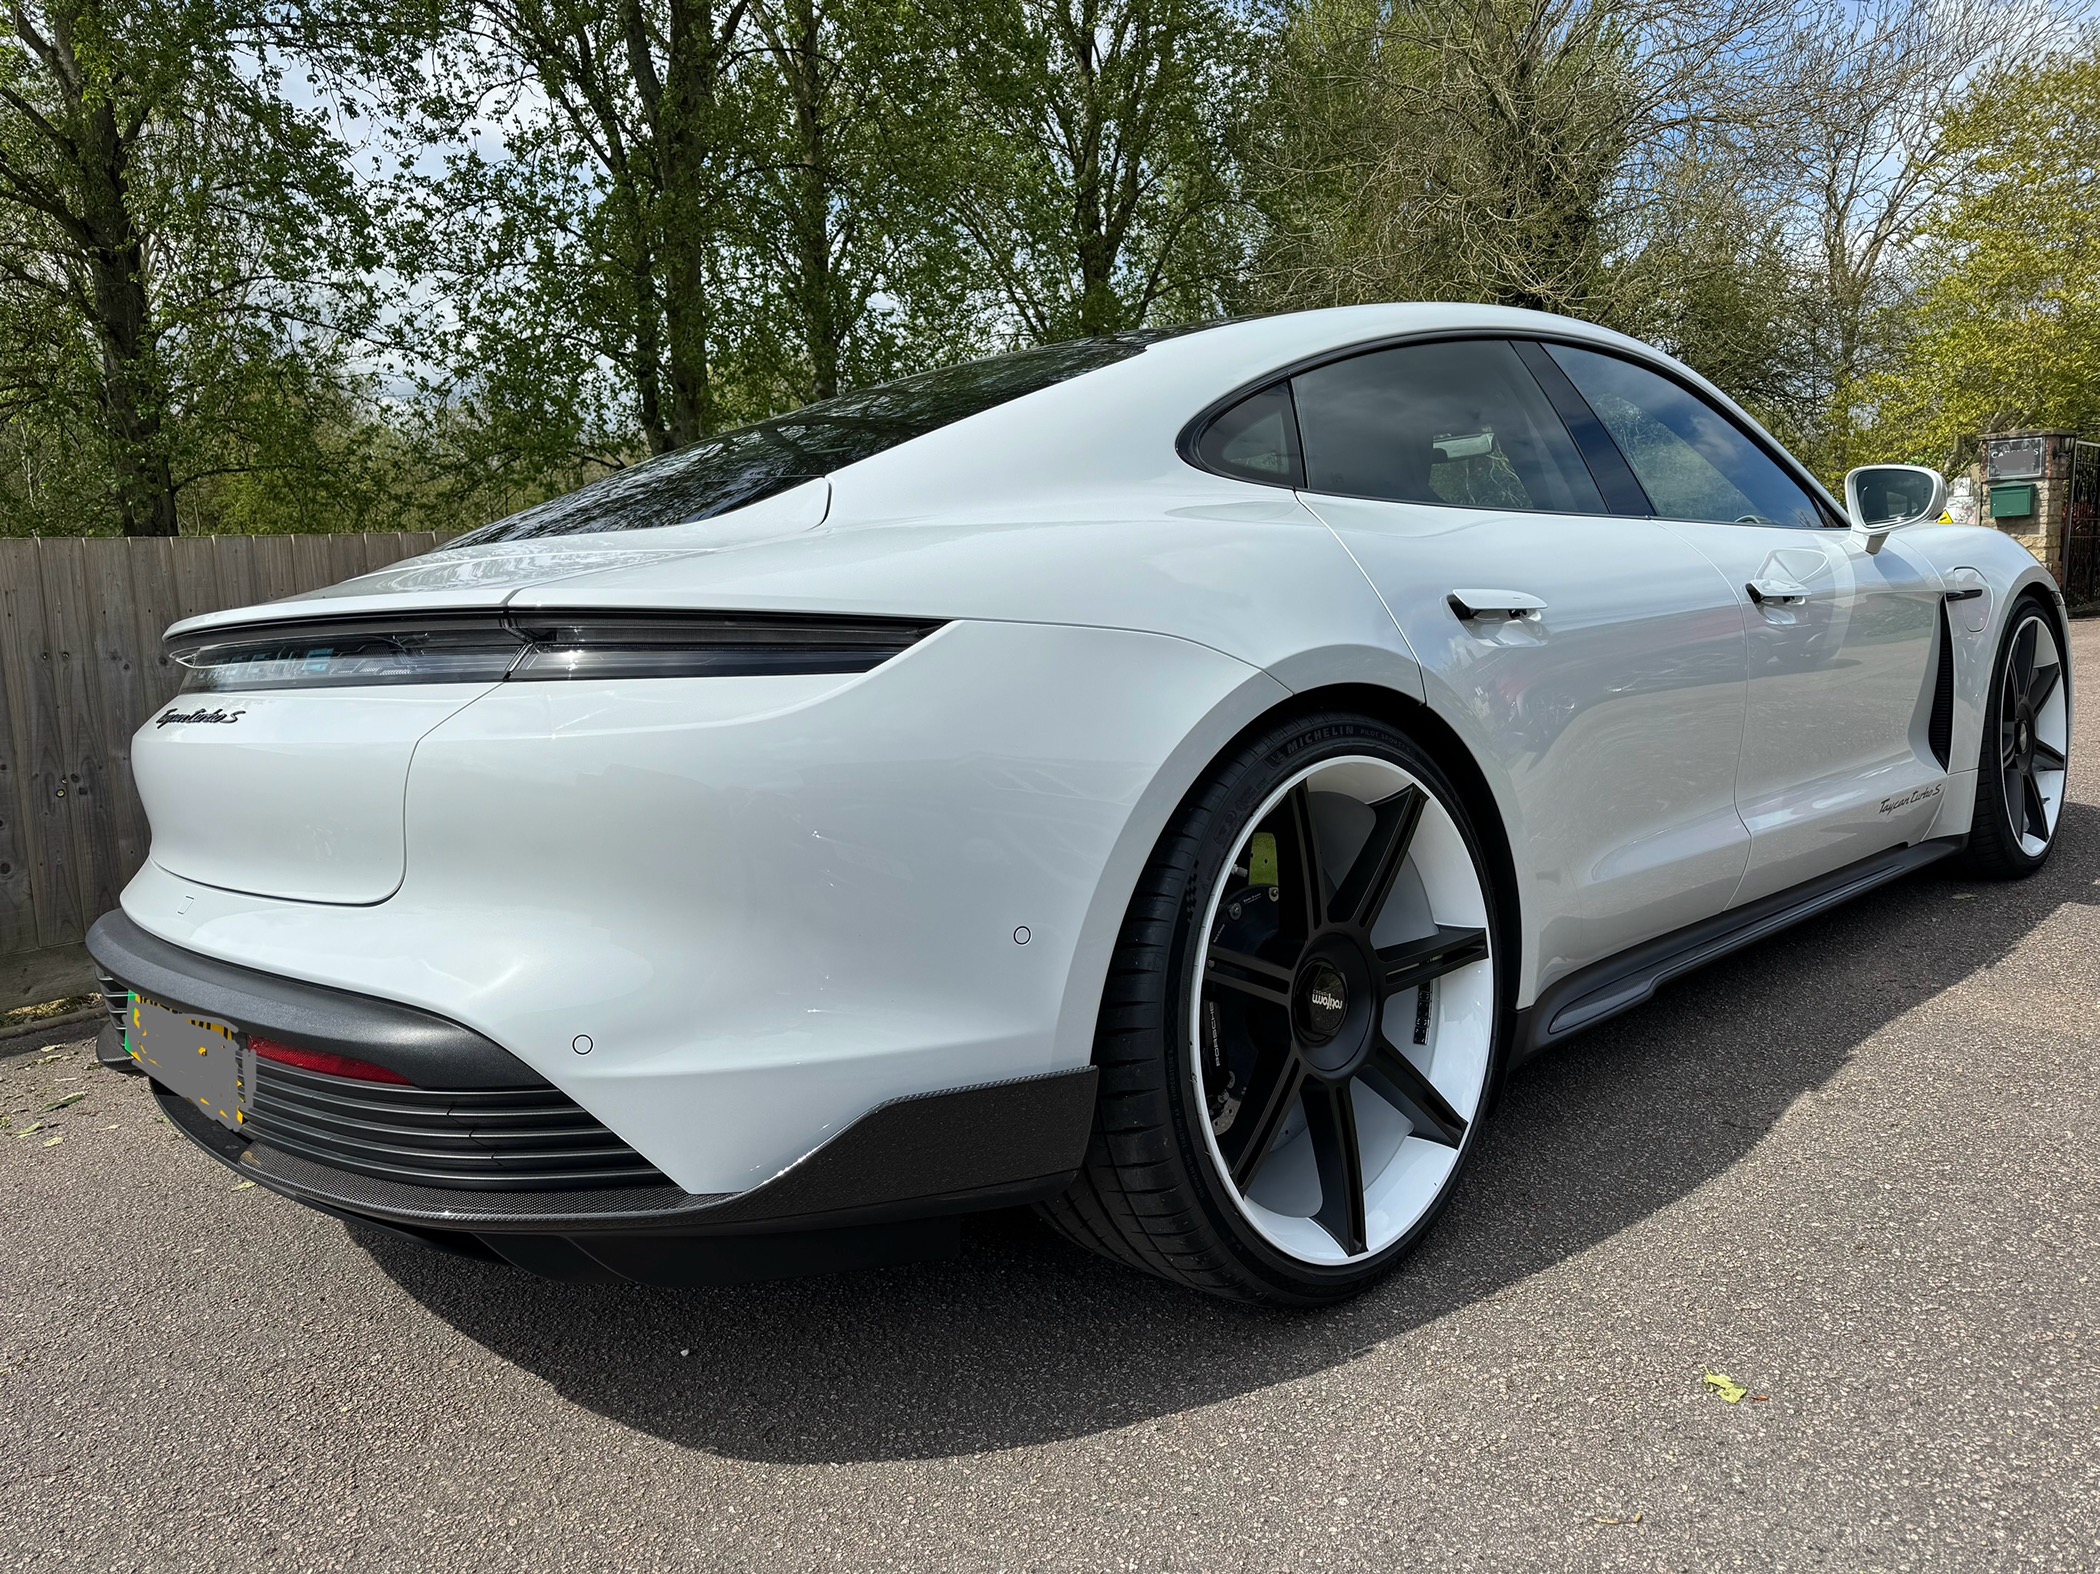 Porsche Taycan One step closer to that Mission E Concept look IMG_1443